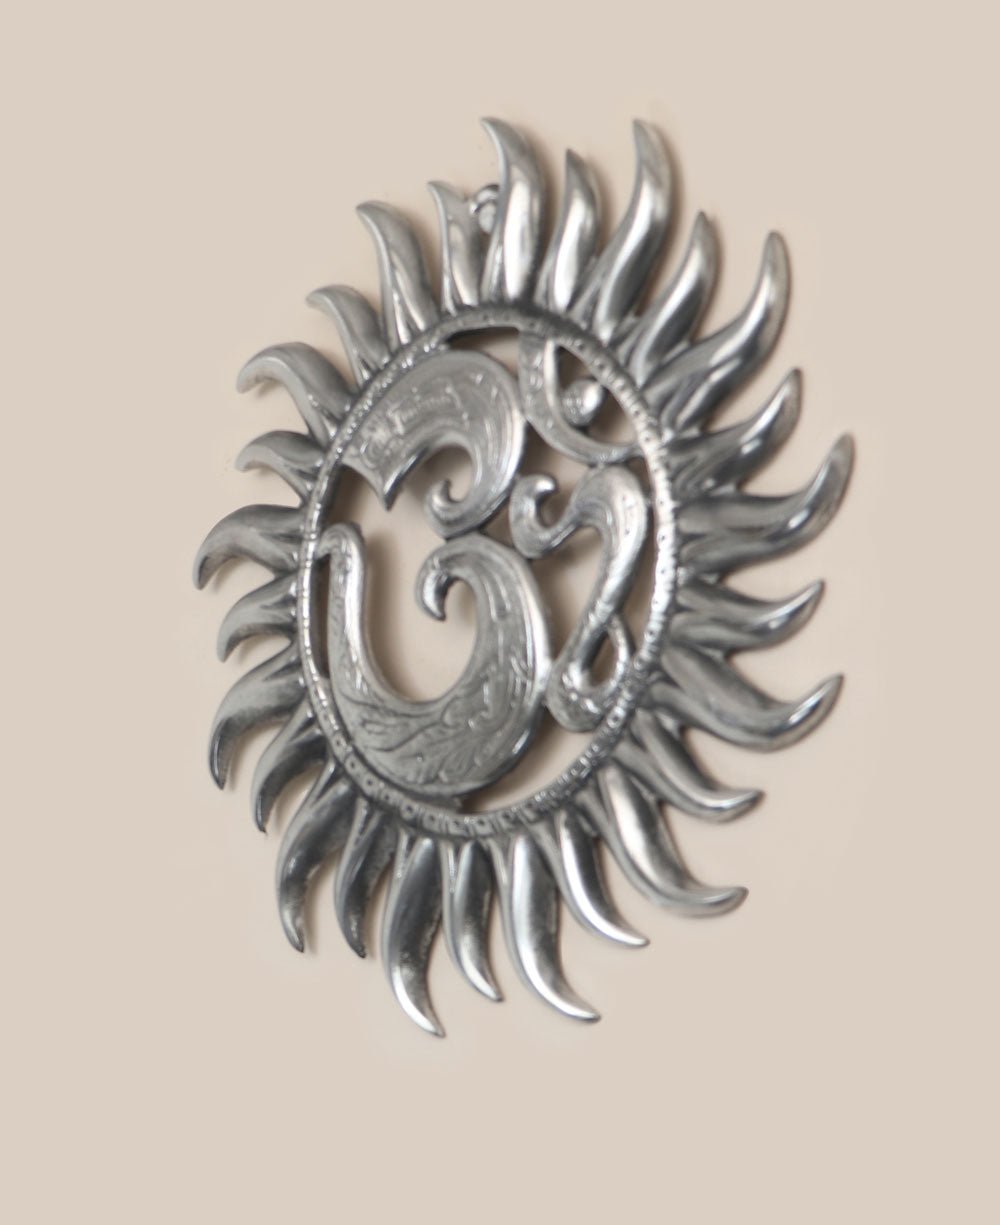 Om Sun Wall Hanging with Silver Colored Finish - Wind Chimes